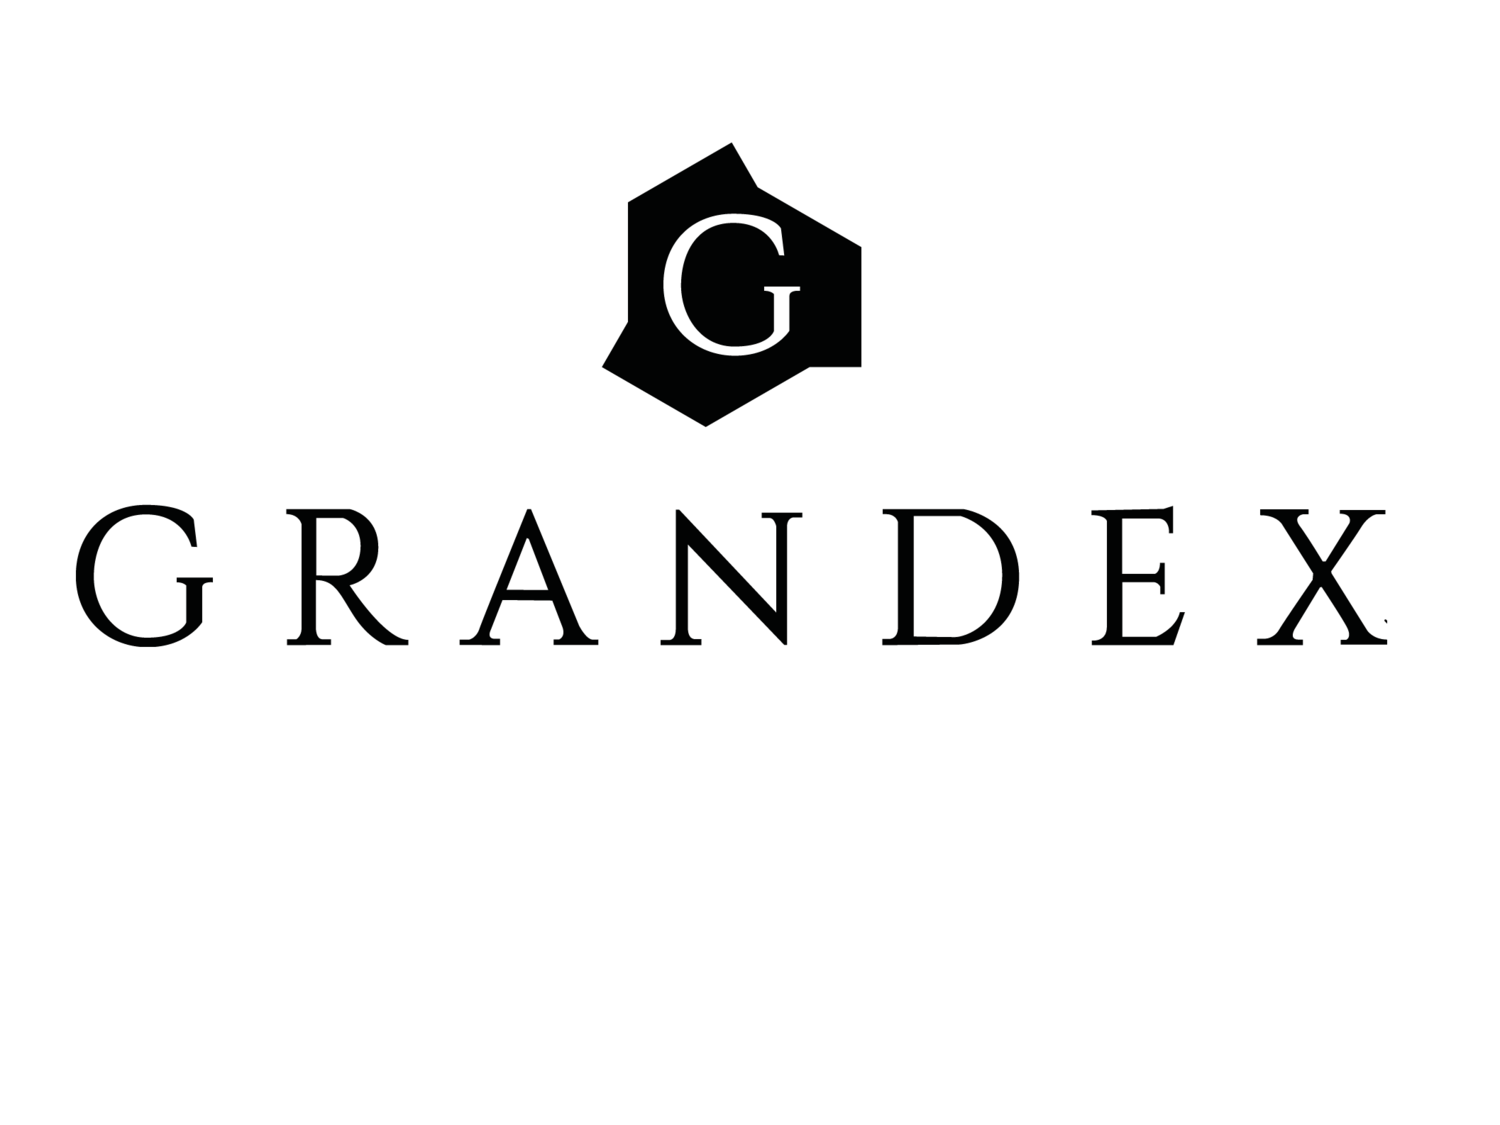 <span style="font-weight: bold;">Grandex</span>